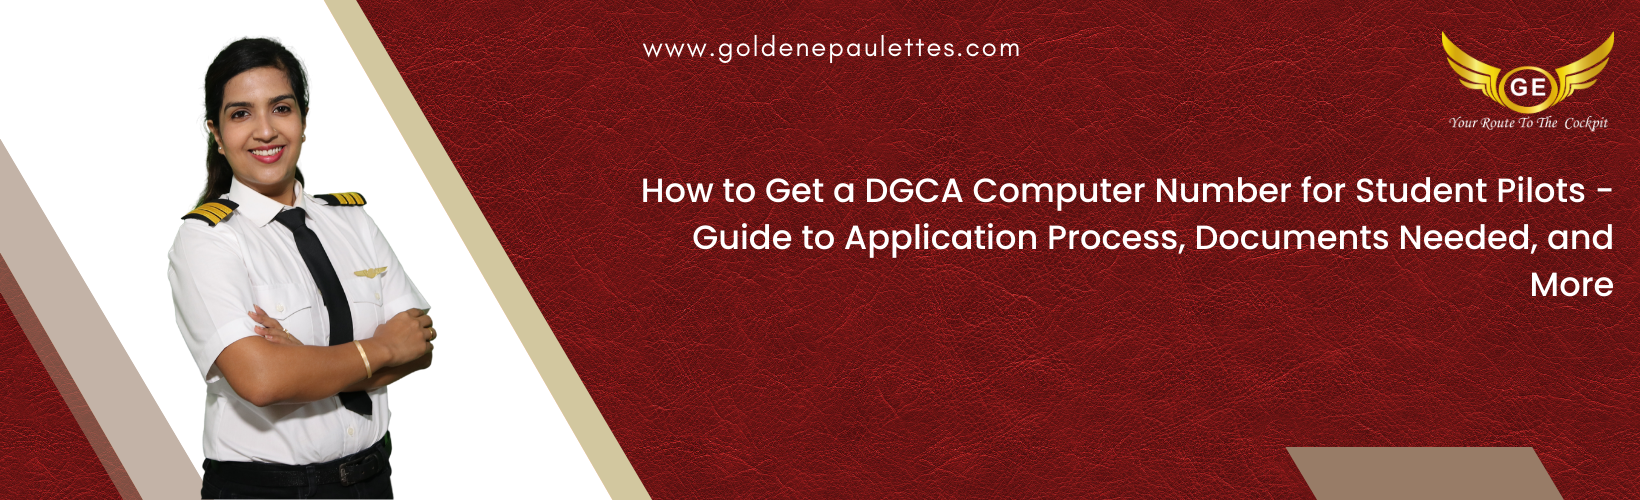 How to Obtain a DGCA Computer Number for Student Pilots